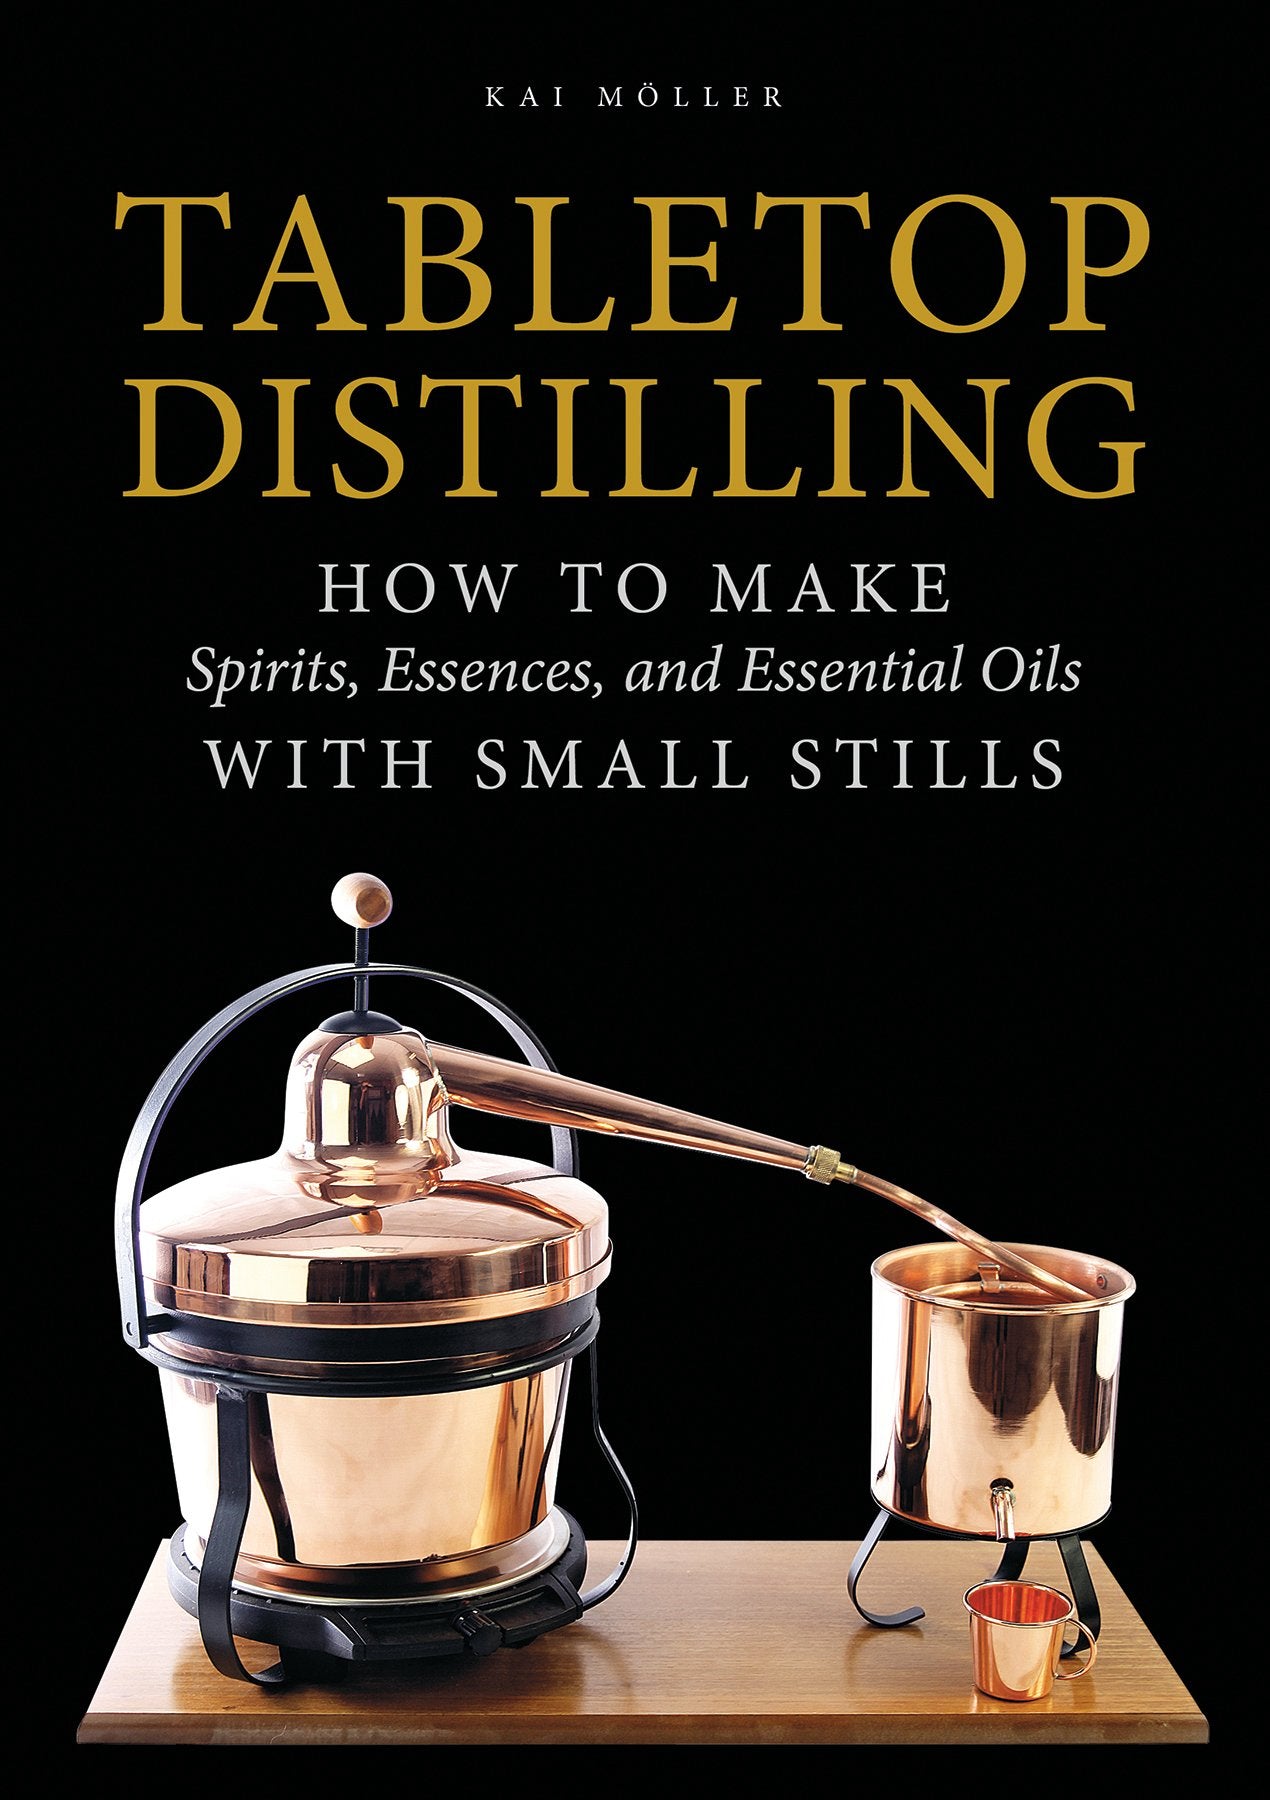 Tabletop Distilling: How to Make Spirits, Essences, and Essential Oils with Small Stills (Kai Möller)